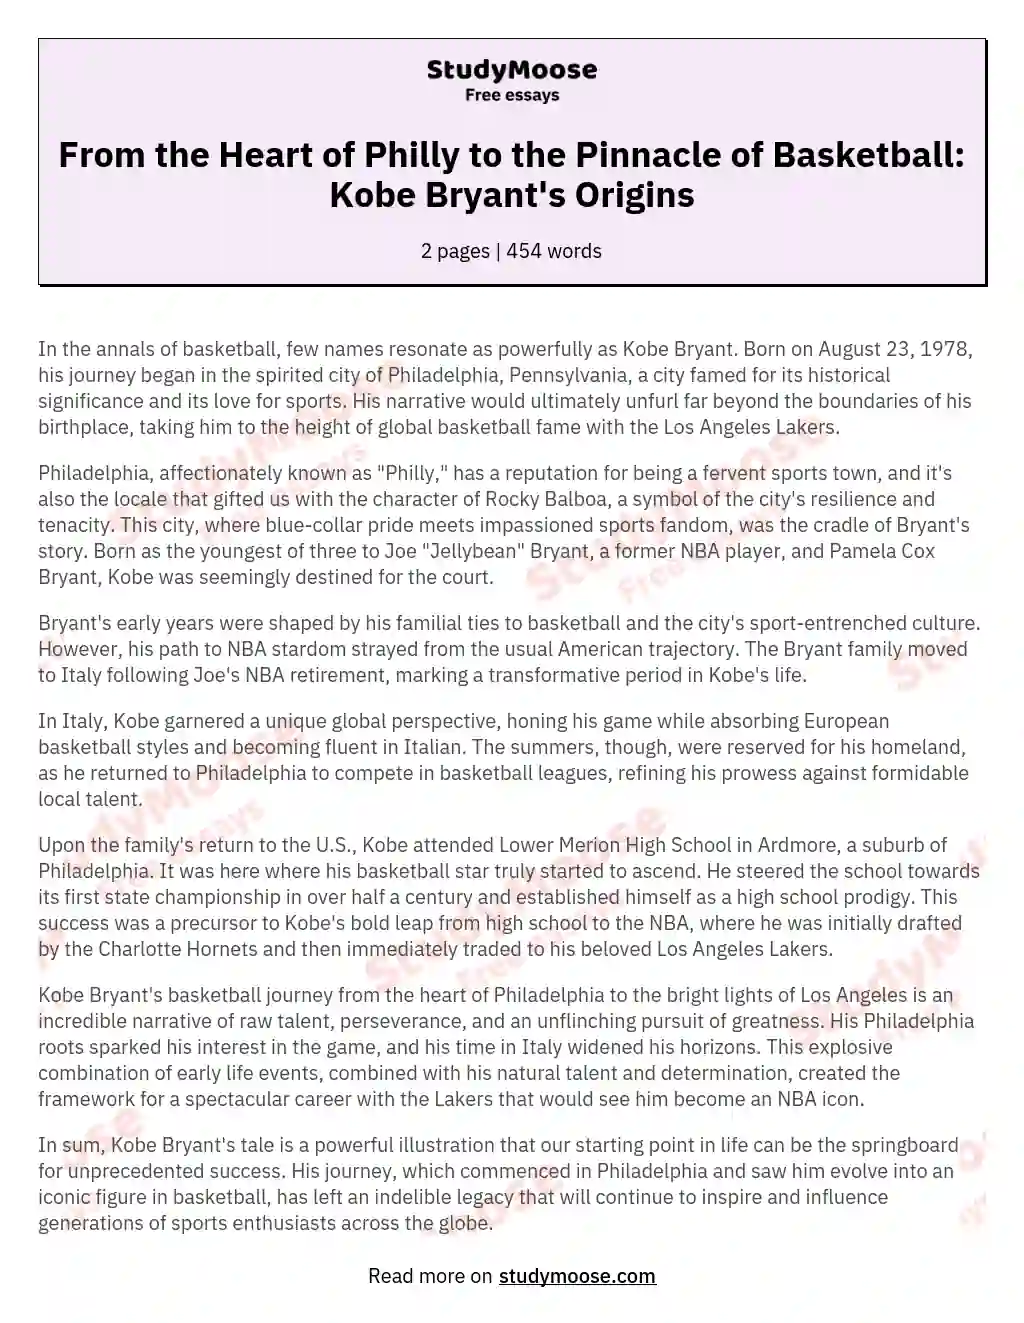 From the Heart of Philly to the Pinnacle of Basketball: Kobe Bryant's Origins essay